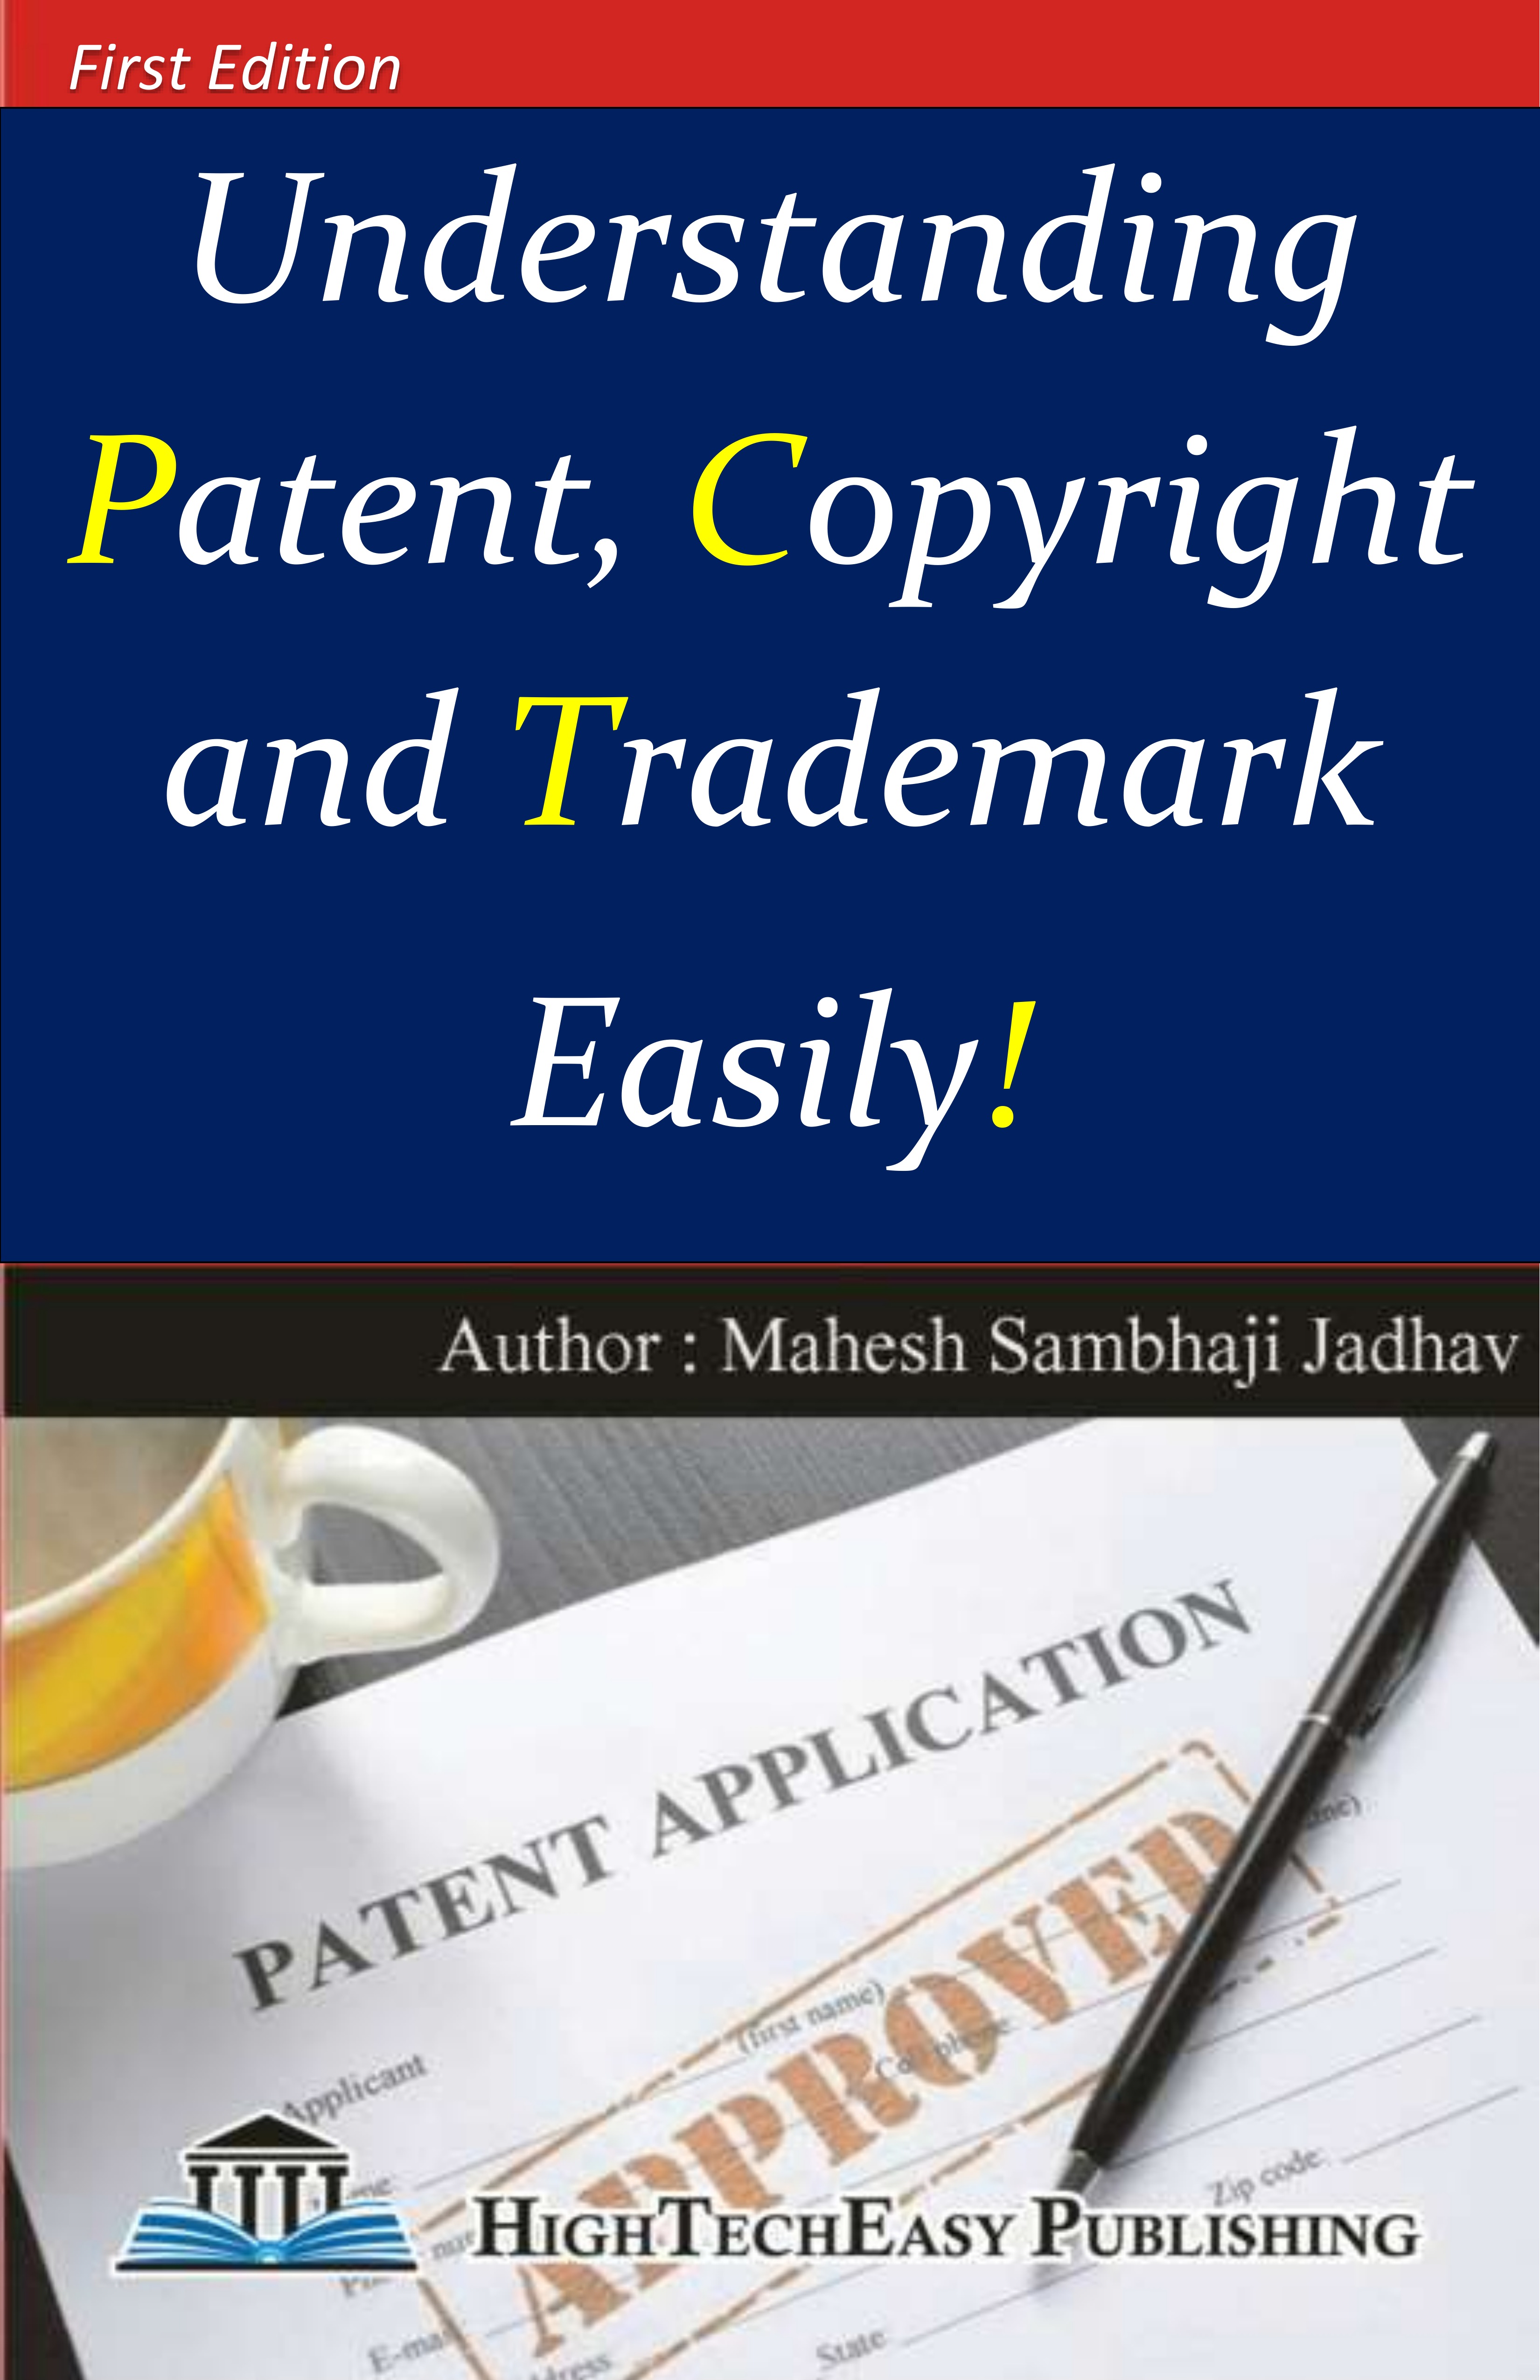 Understanding Patent, Copyright and Trademark Easily